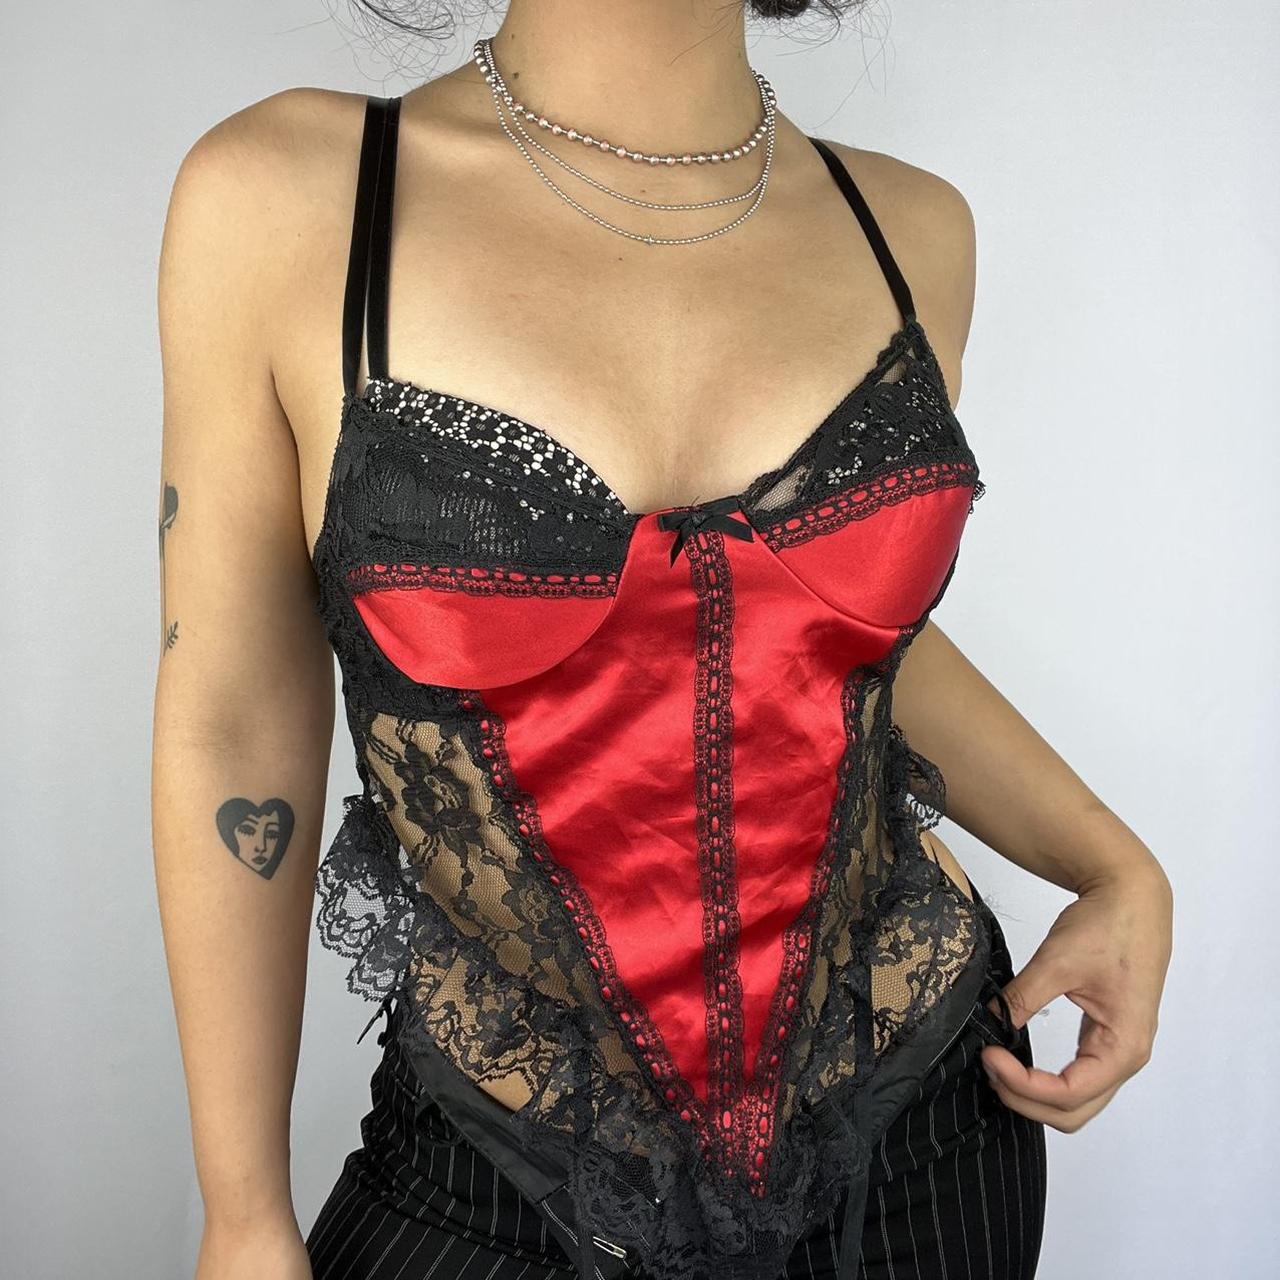 Product Image 2 - Y2K Goth Corset Top 💋

$5